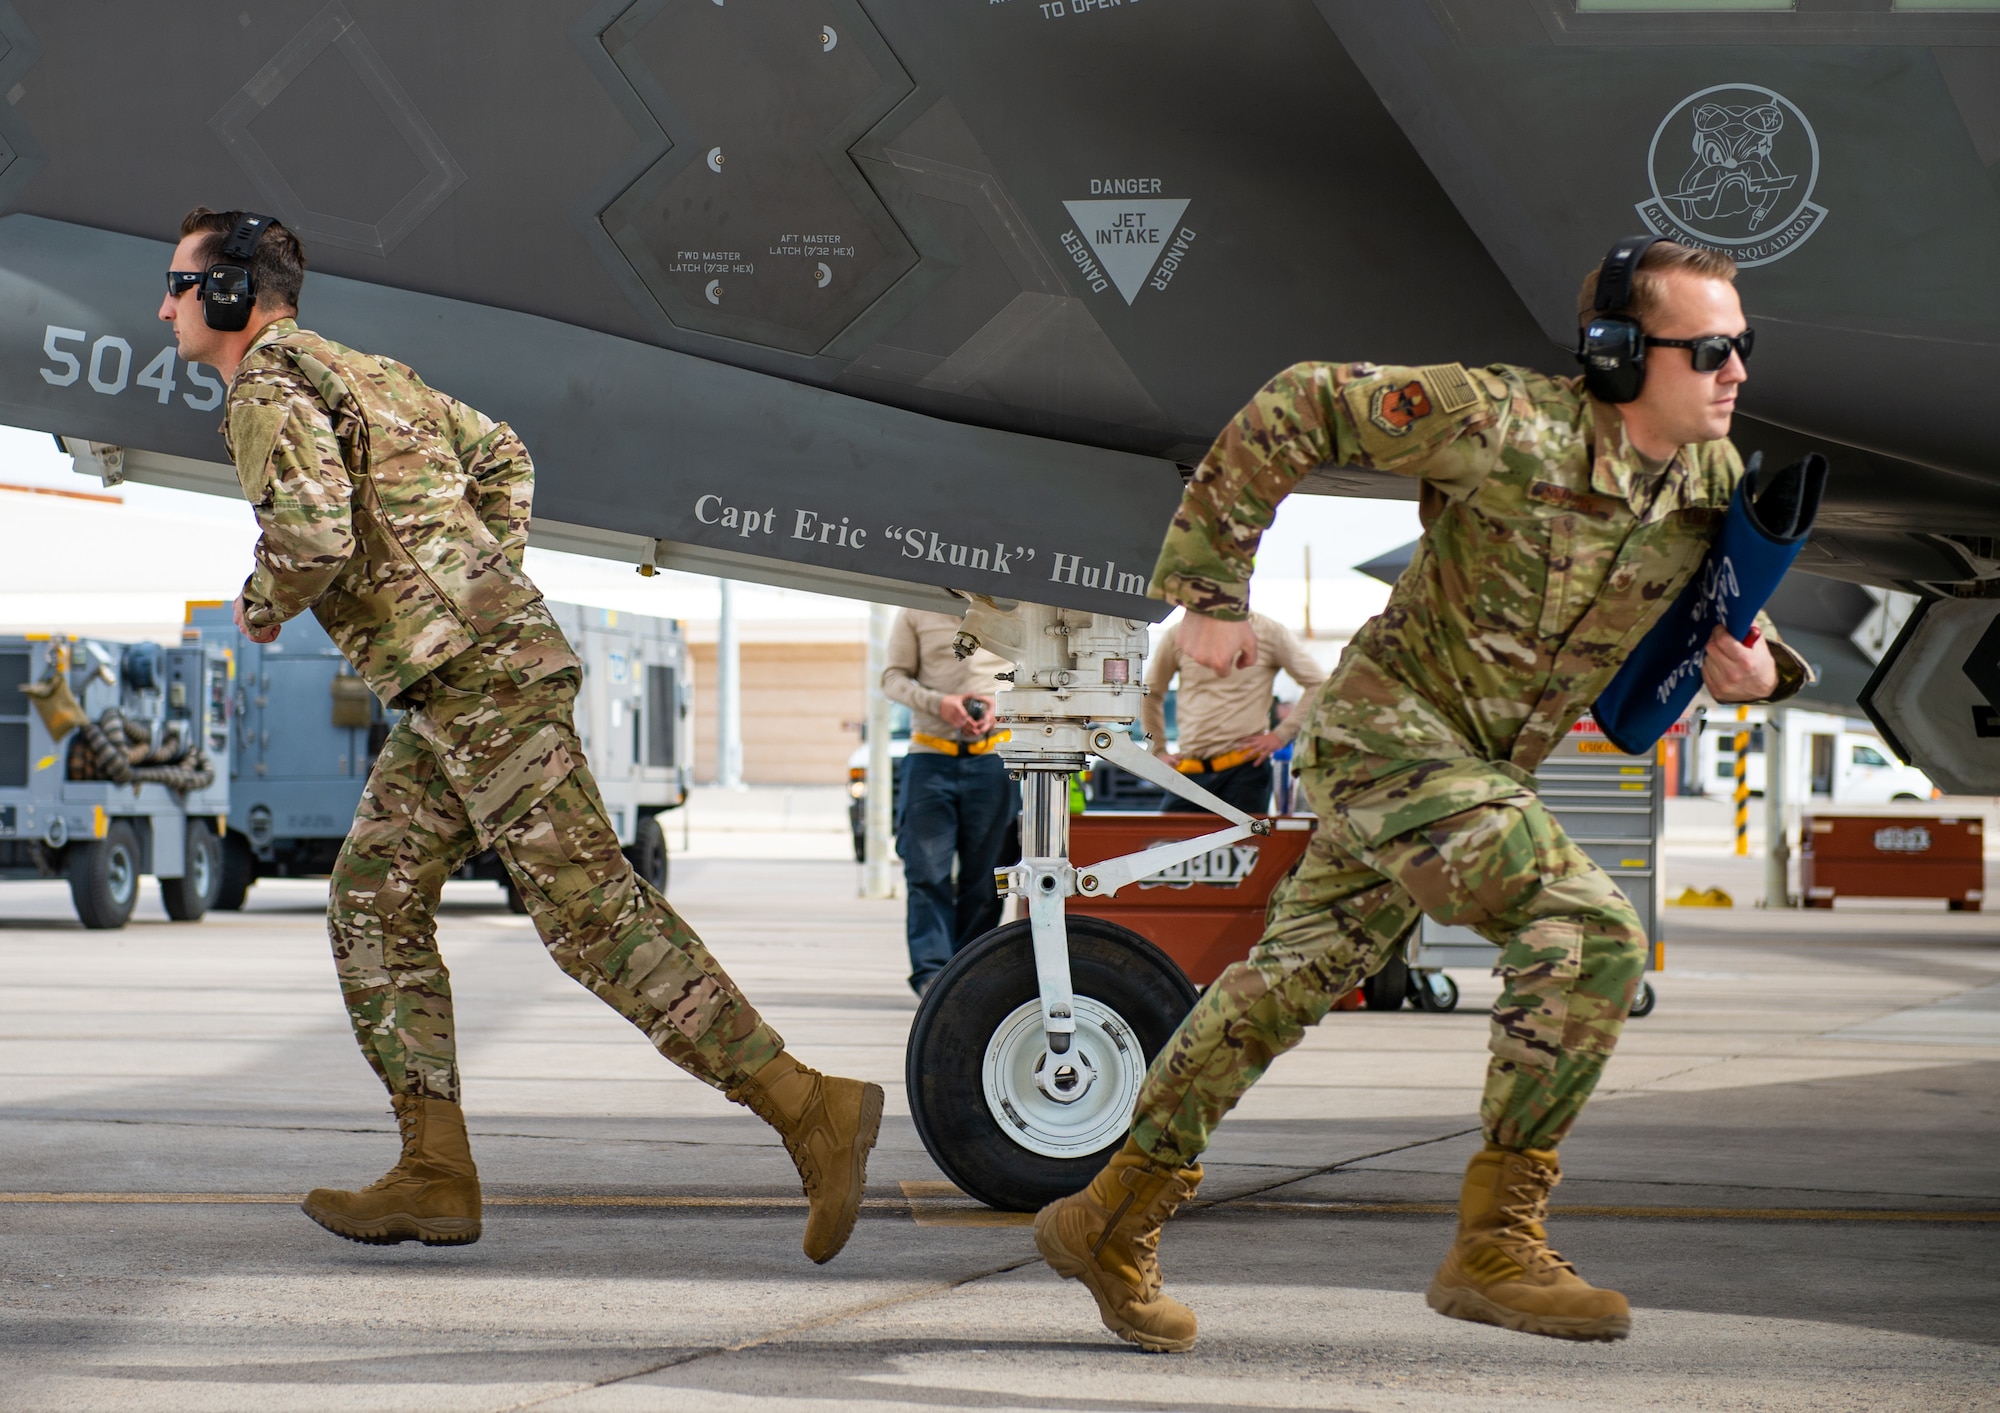 Staff Sgt. Paul Ogletree, F-35A Lighting II Demonstration Team dedicated crew chief, (left) and Tech. Sgt. Michael Couture, F-35 Demo Team lead (right) sprint to their positions during a ground performance Jan. 31, 2019, at Luke Air Force Base, Ariz. The team’s newly developed ground performance features sharp, fast paced movements which highlight the pride and professionalism of the team and U.S Air Force. (U.S. Air Force photo by Senior Airman Alexander Cook)